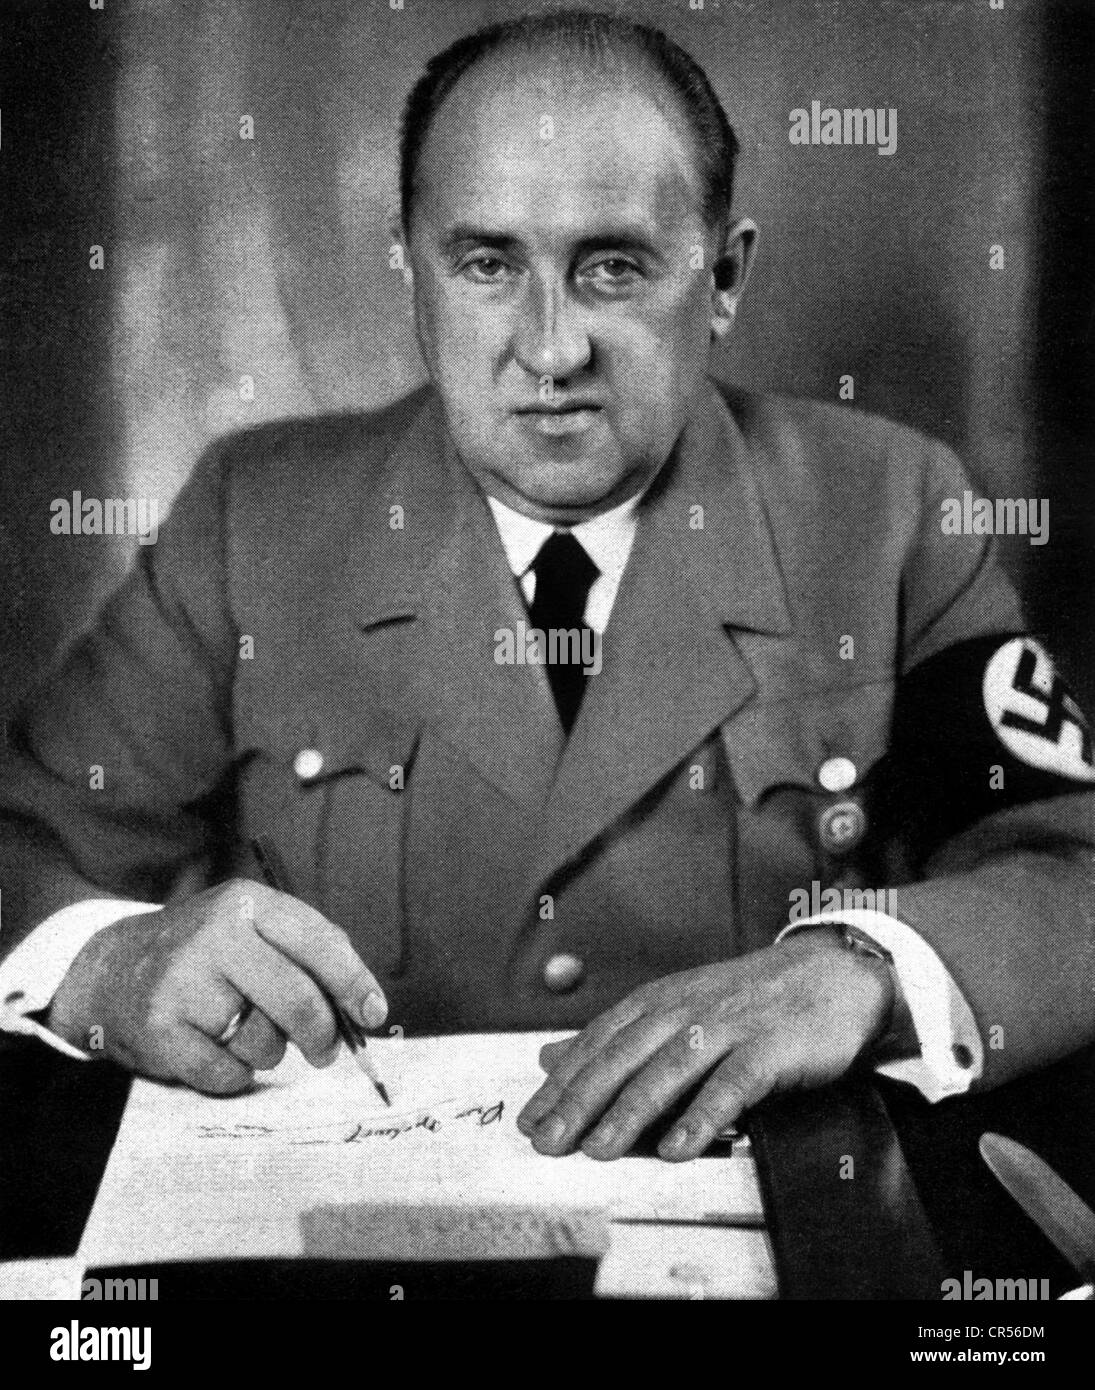 Funk, Walther, 18.8.1890 - 31.5.1960, German politician (NSDAP), Reichs Minister of Economics 1938 - 1945, half length, at his desk, 1939, Stock Photo